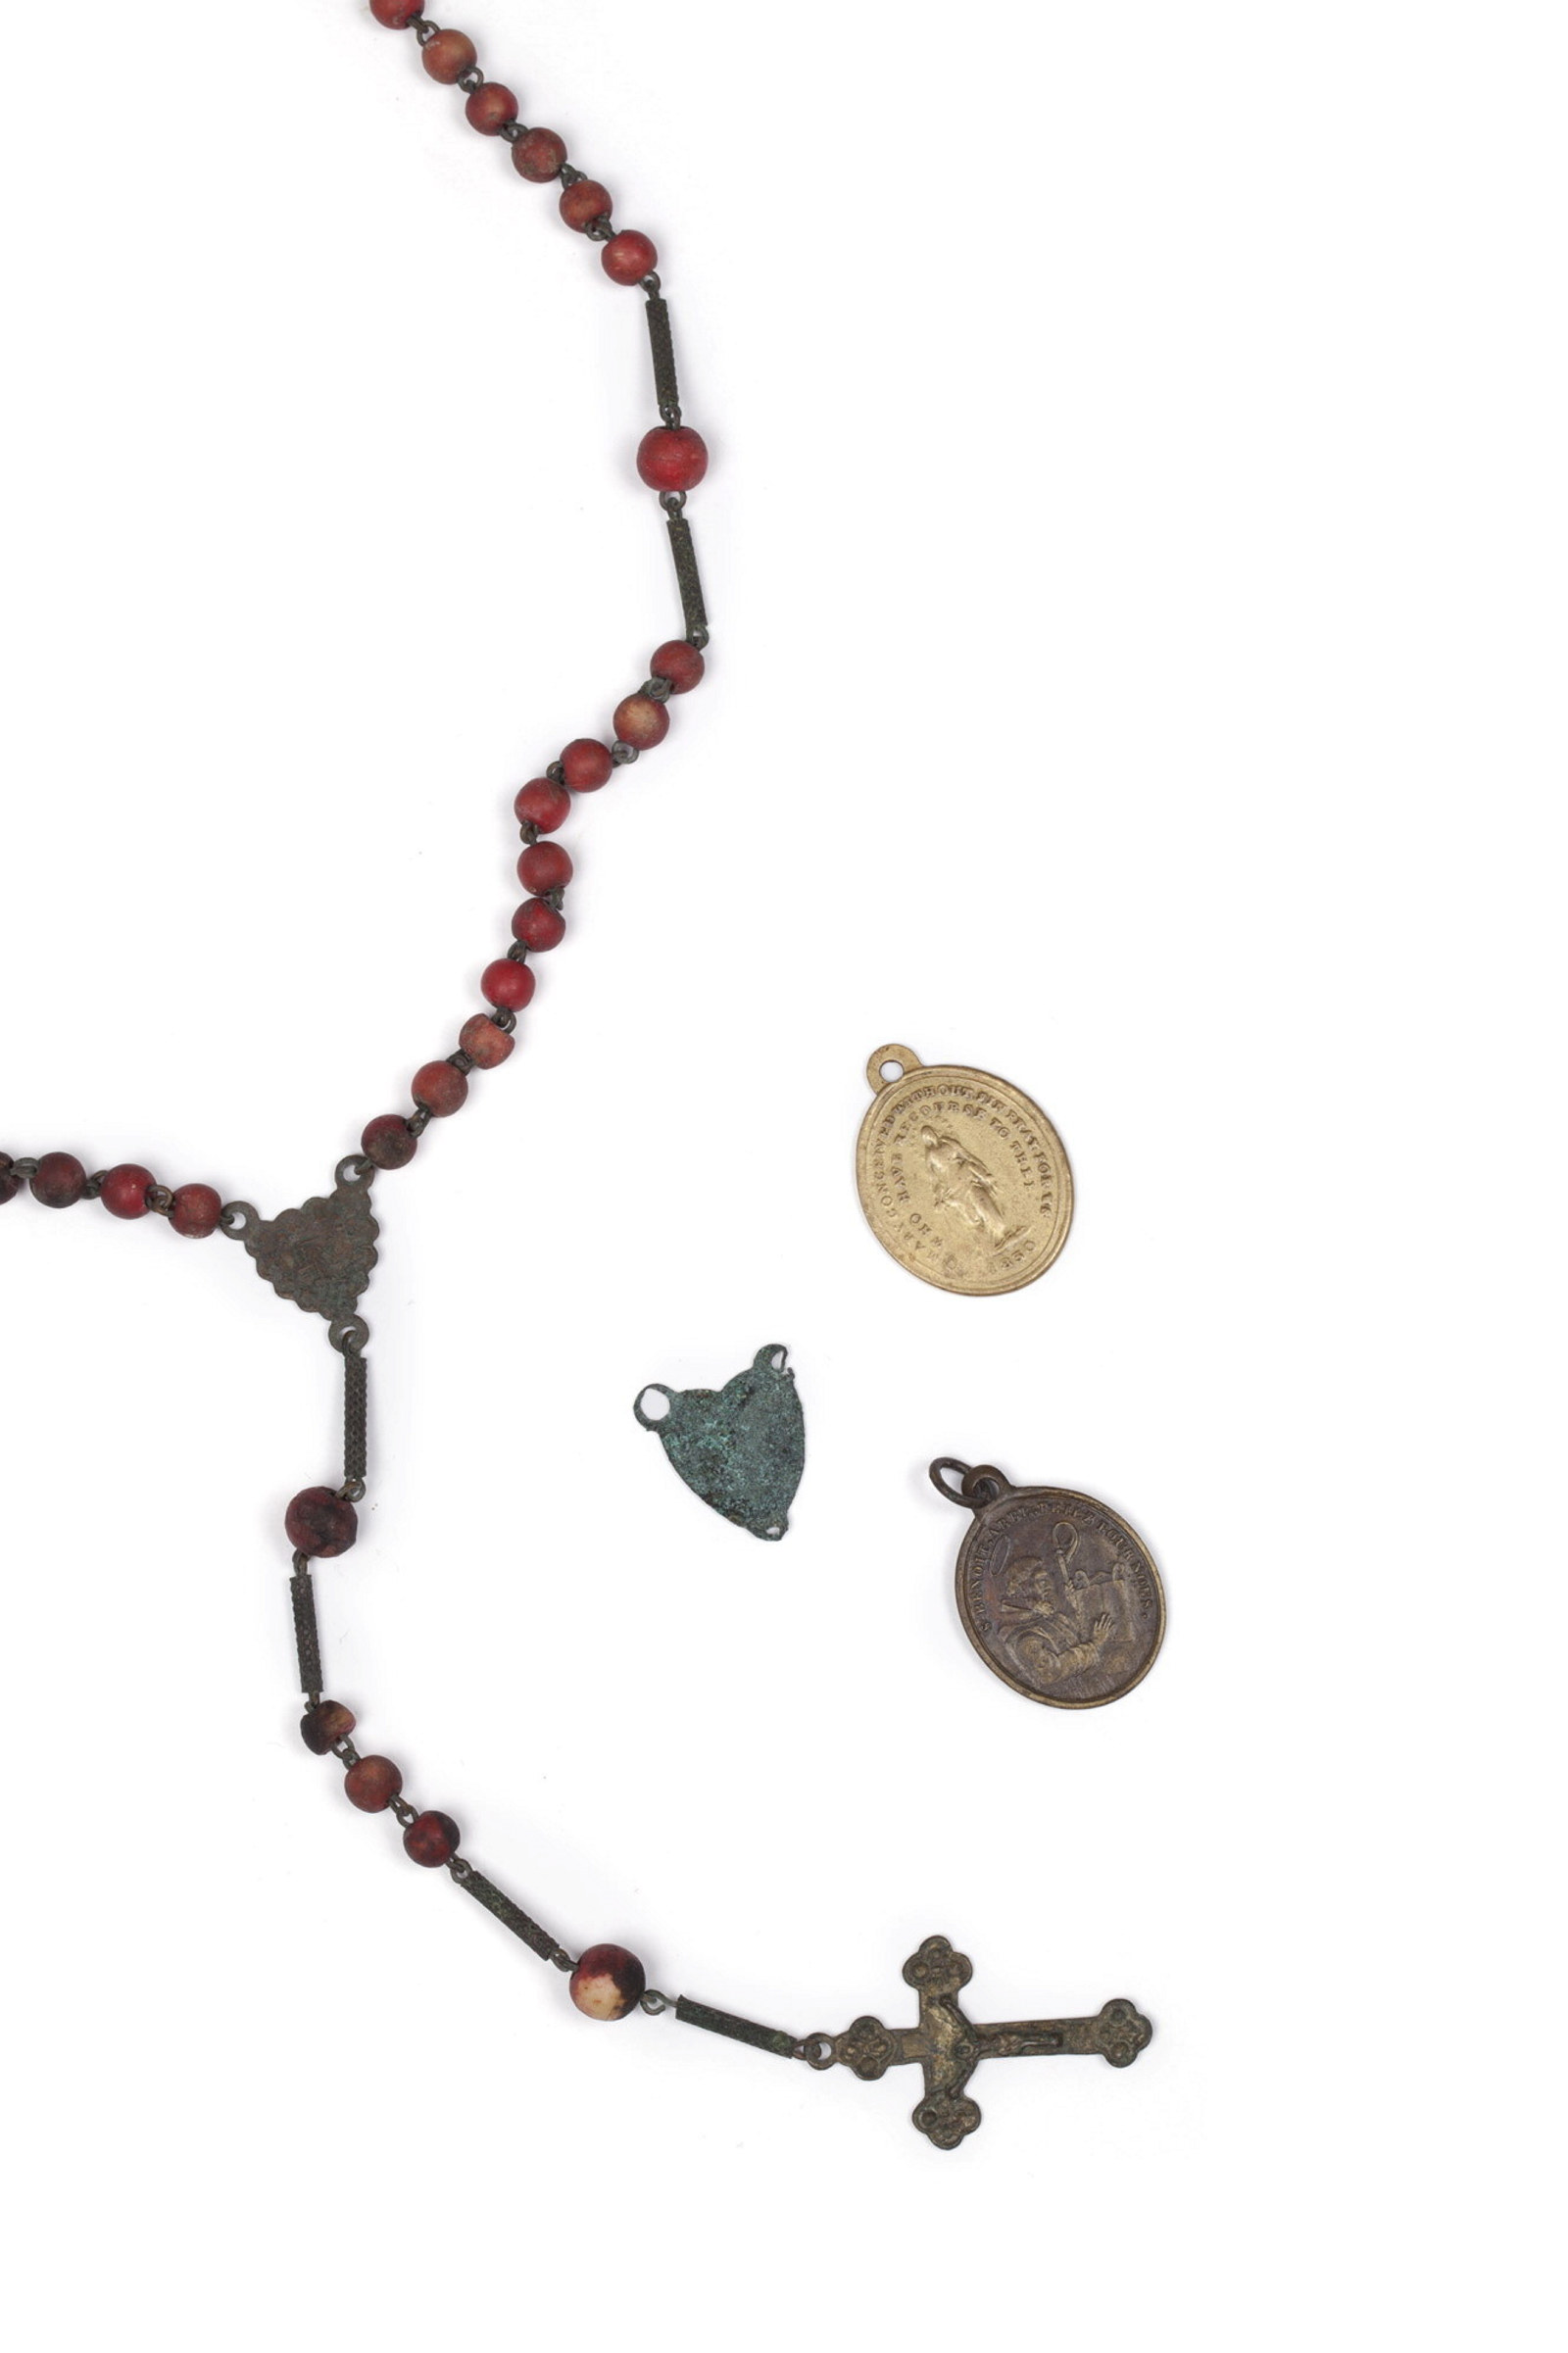 Neclklace with 3 small medals in form of sacred hearts.